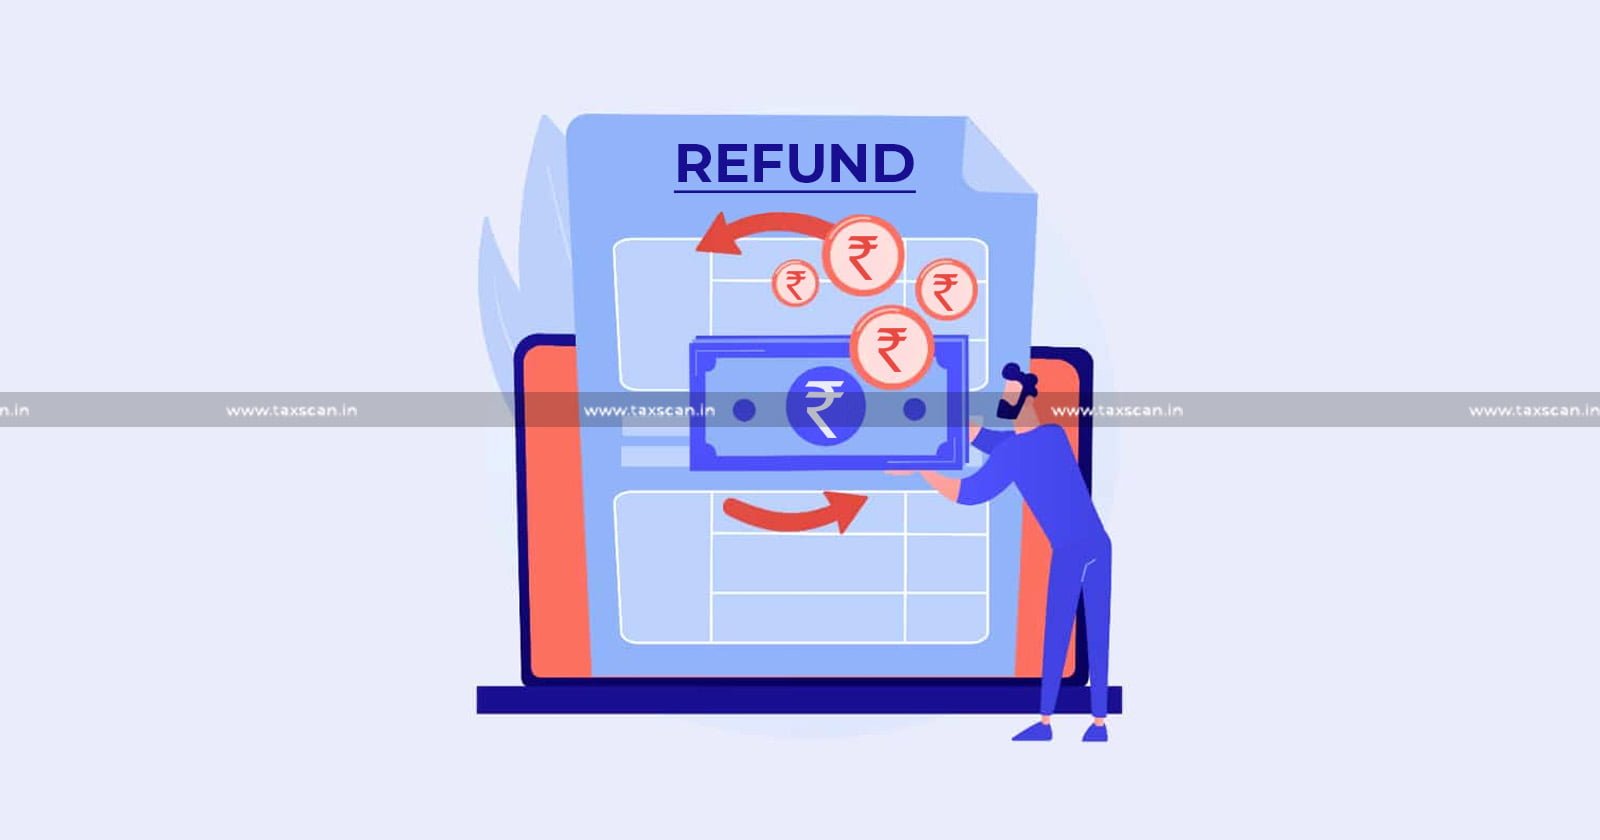 Refund - Duty - Paid - Mistake - Denied - filed - Time - Prescribed – CESTAT - TAXSCAN